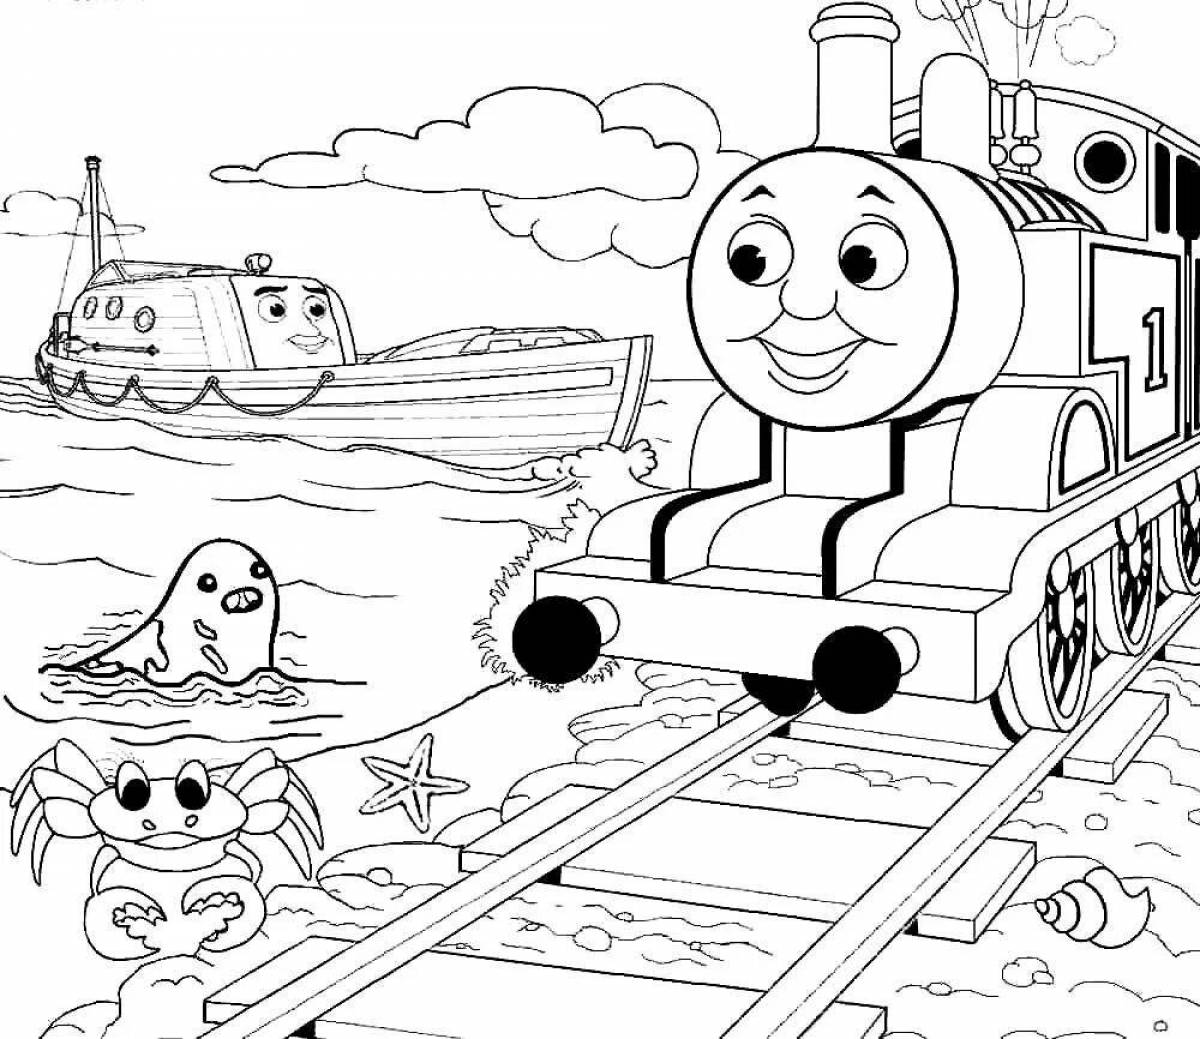 Coloring trains for boys